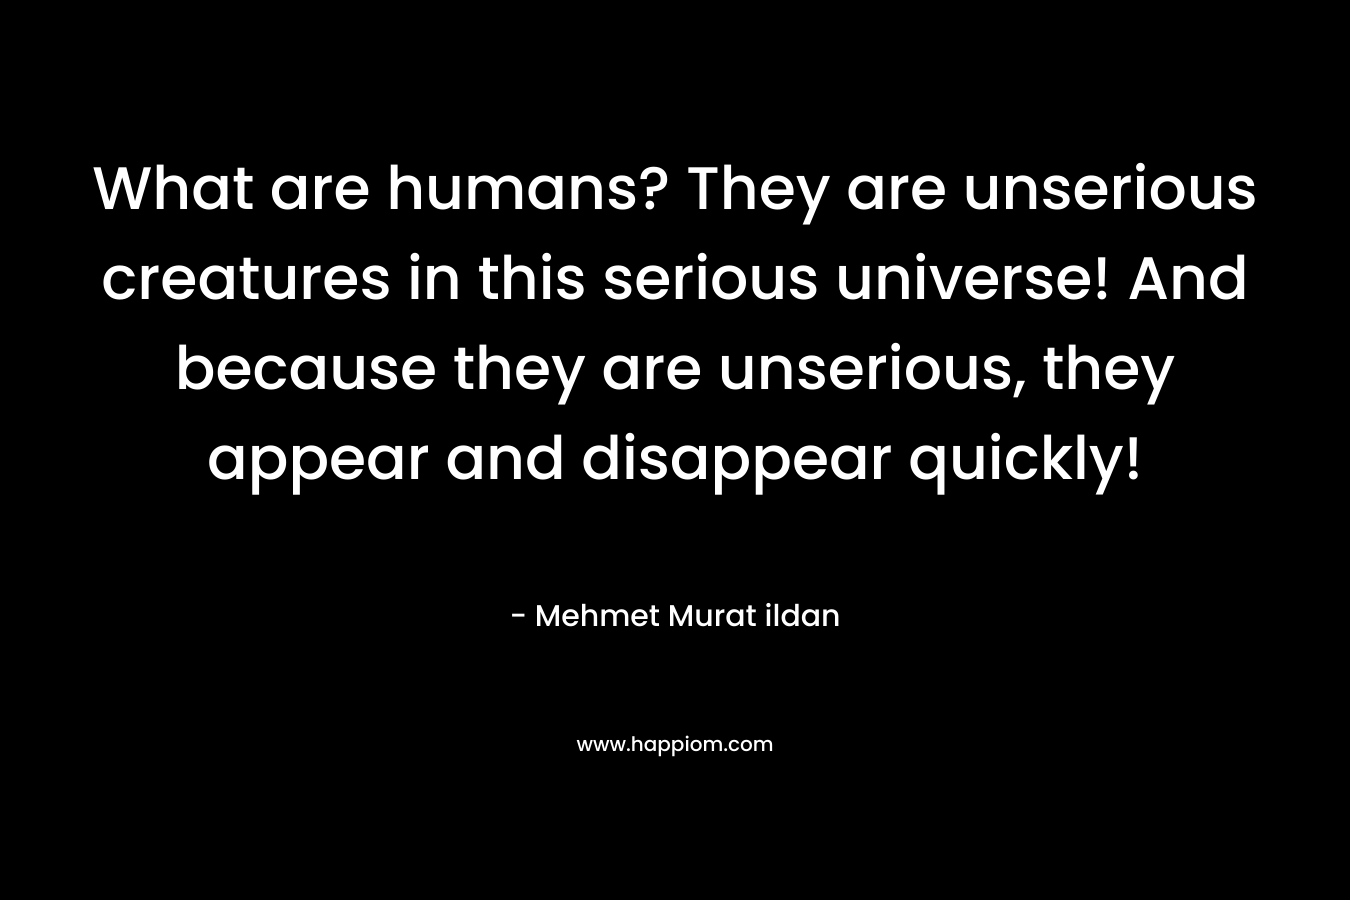 What are humans? They are unserious creatures in this serious universe! And because they are unserious, they appear and disappear quickly!